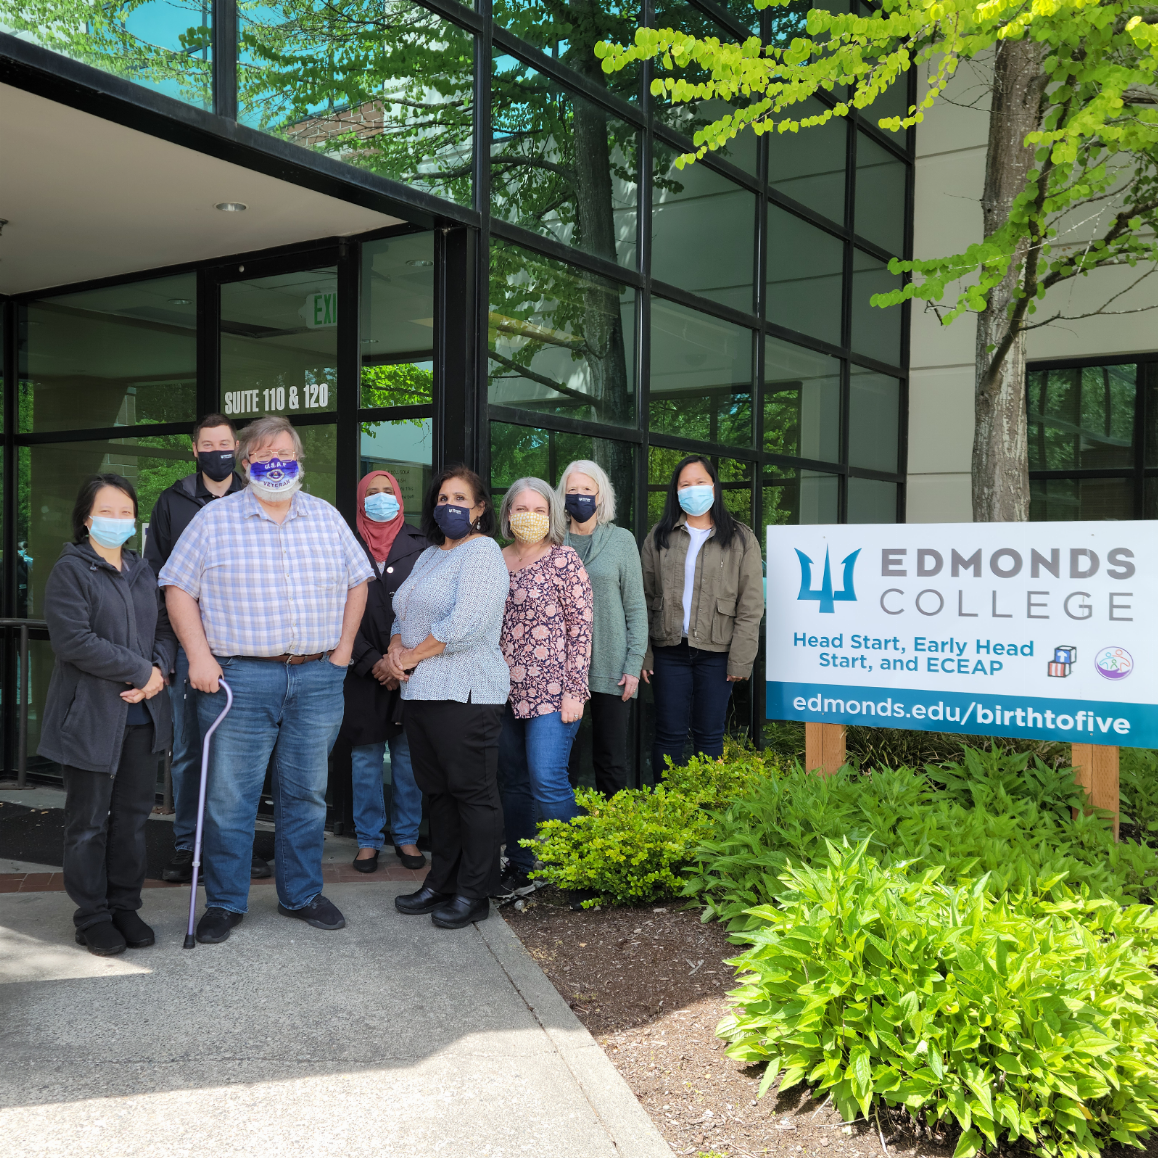 Edmonds College’s Head Start program started in 1983 and remains the only full-service program in Snohomish County.